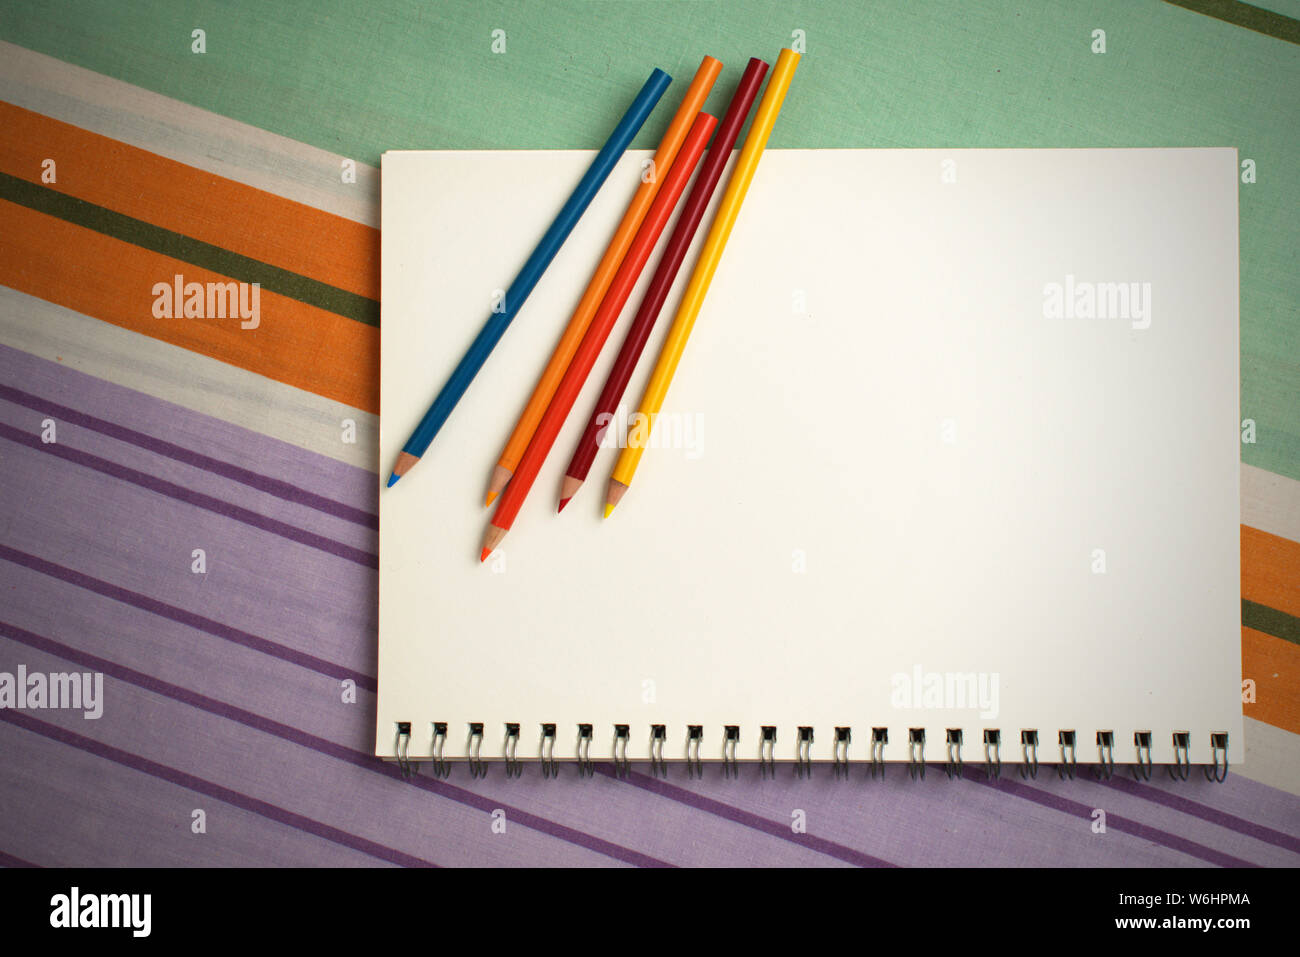 Spiral sketch pad and graphite pencils template image. Good copy space.  Back to school, homework, hand drawing artist concept Stock Photo - Alamy